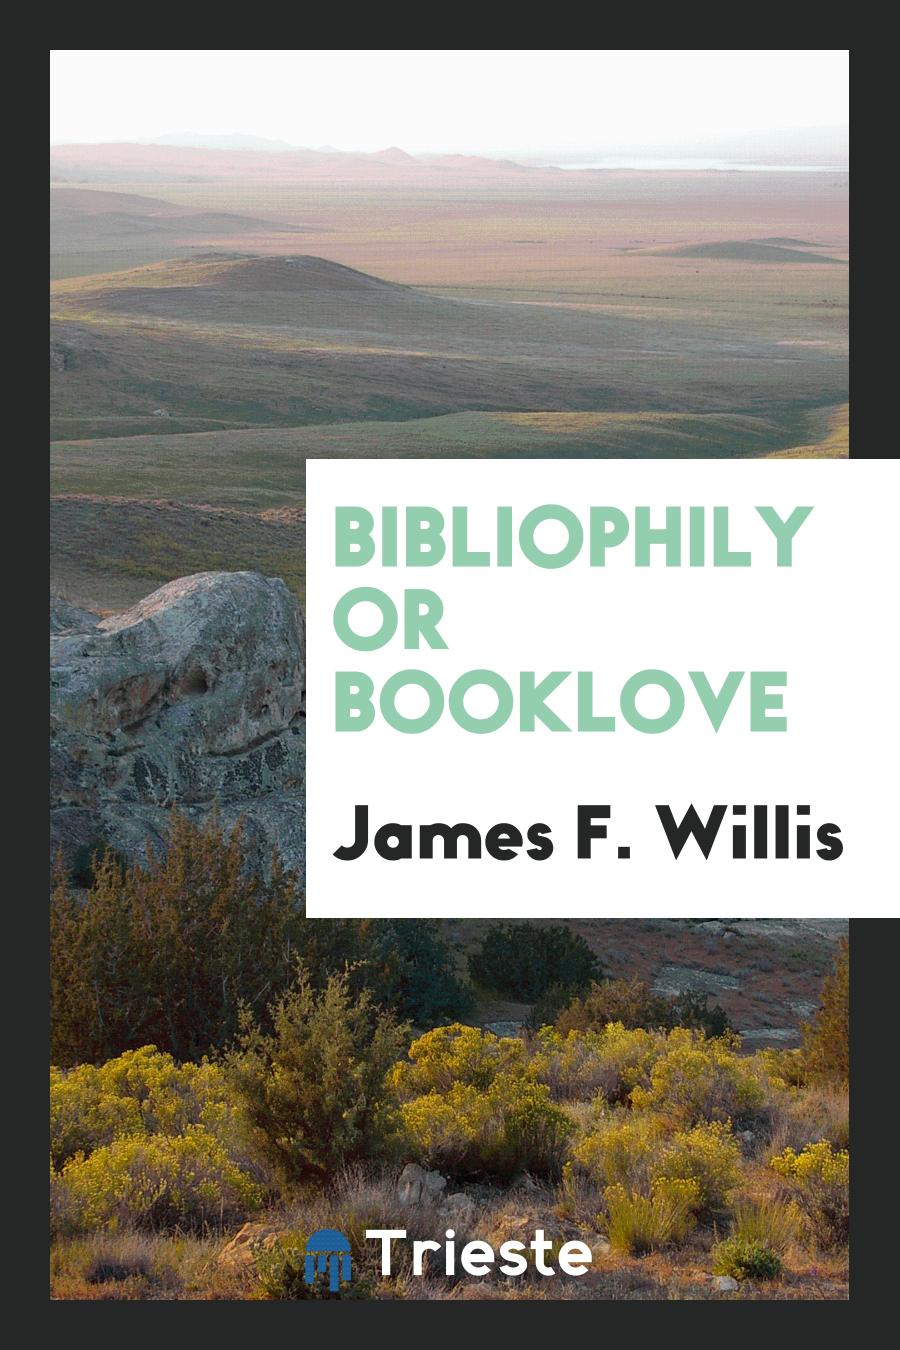 Bibliophily or Booklove